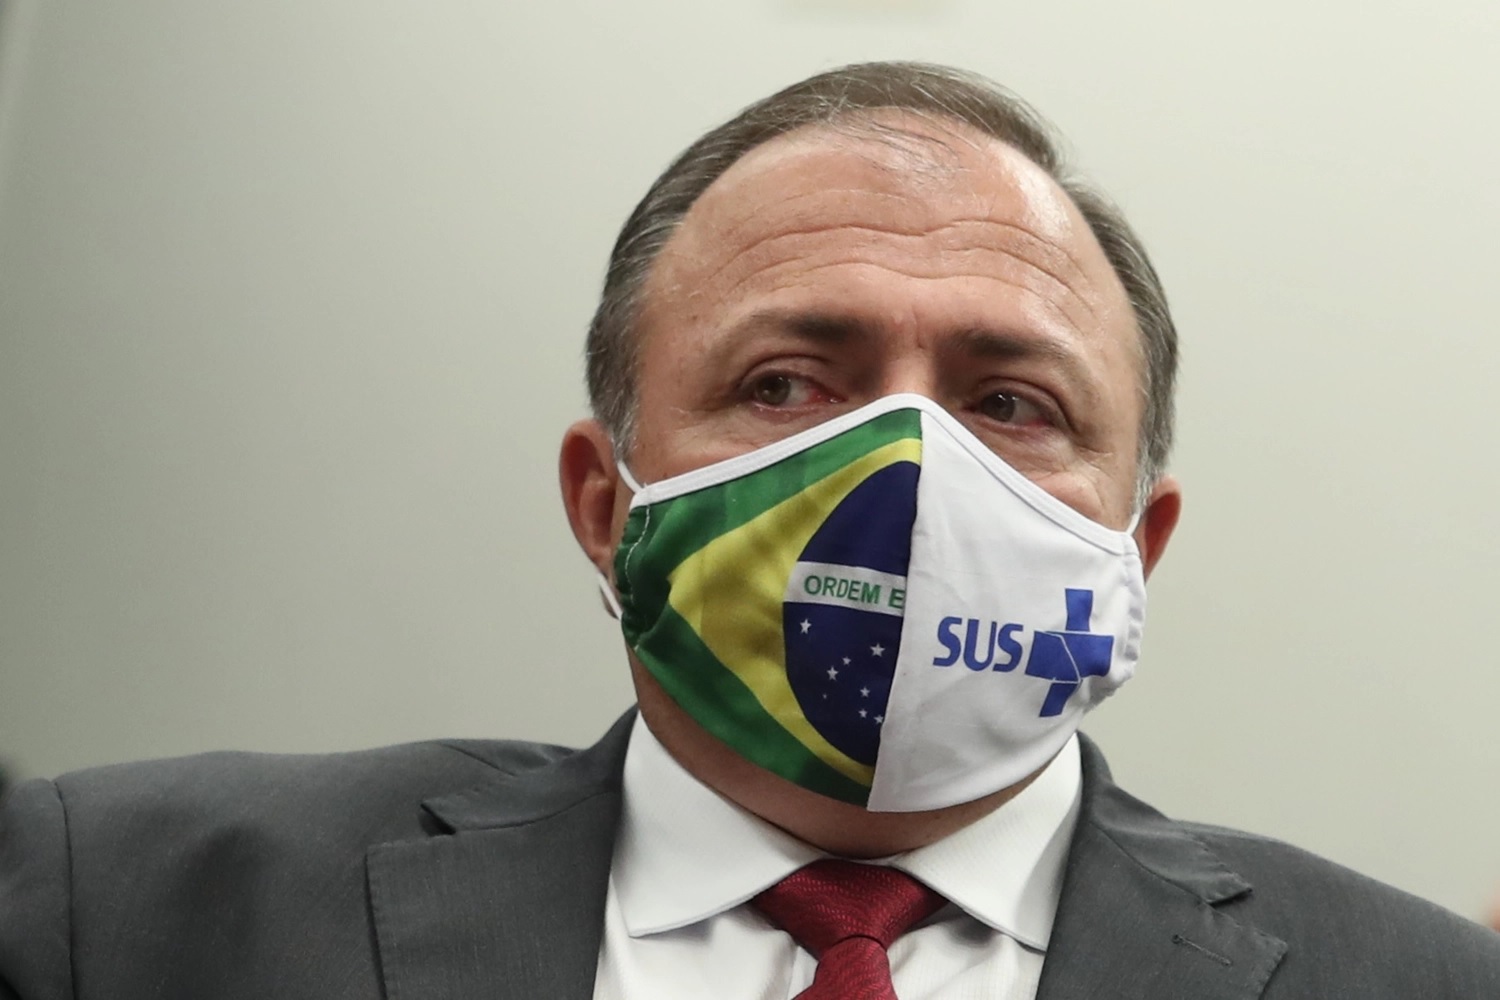 Health minister says Brazil is experiencing the 'most serious form of covid-19'